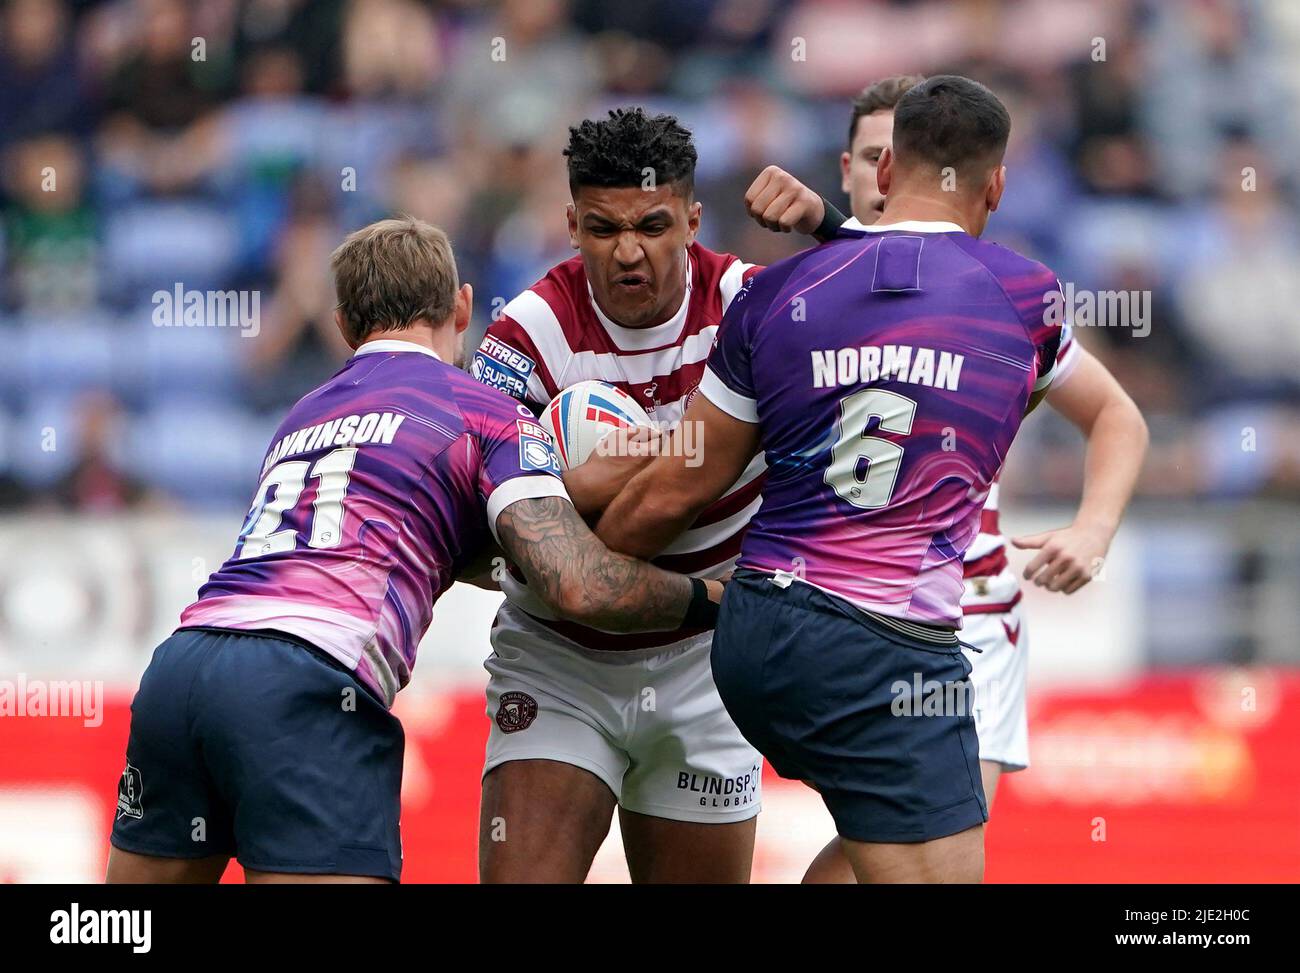 Wigan WarriorsÕ Kai Pearce-Paul is tackled by Toulouse OlympiqueÕs Chris Hankinson (left) and Corey Norman during the Betfred Super League match at the DW Stadium, Wigan. Picture date: Friday June 24, 2022. Stock Photo